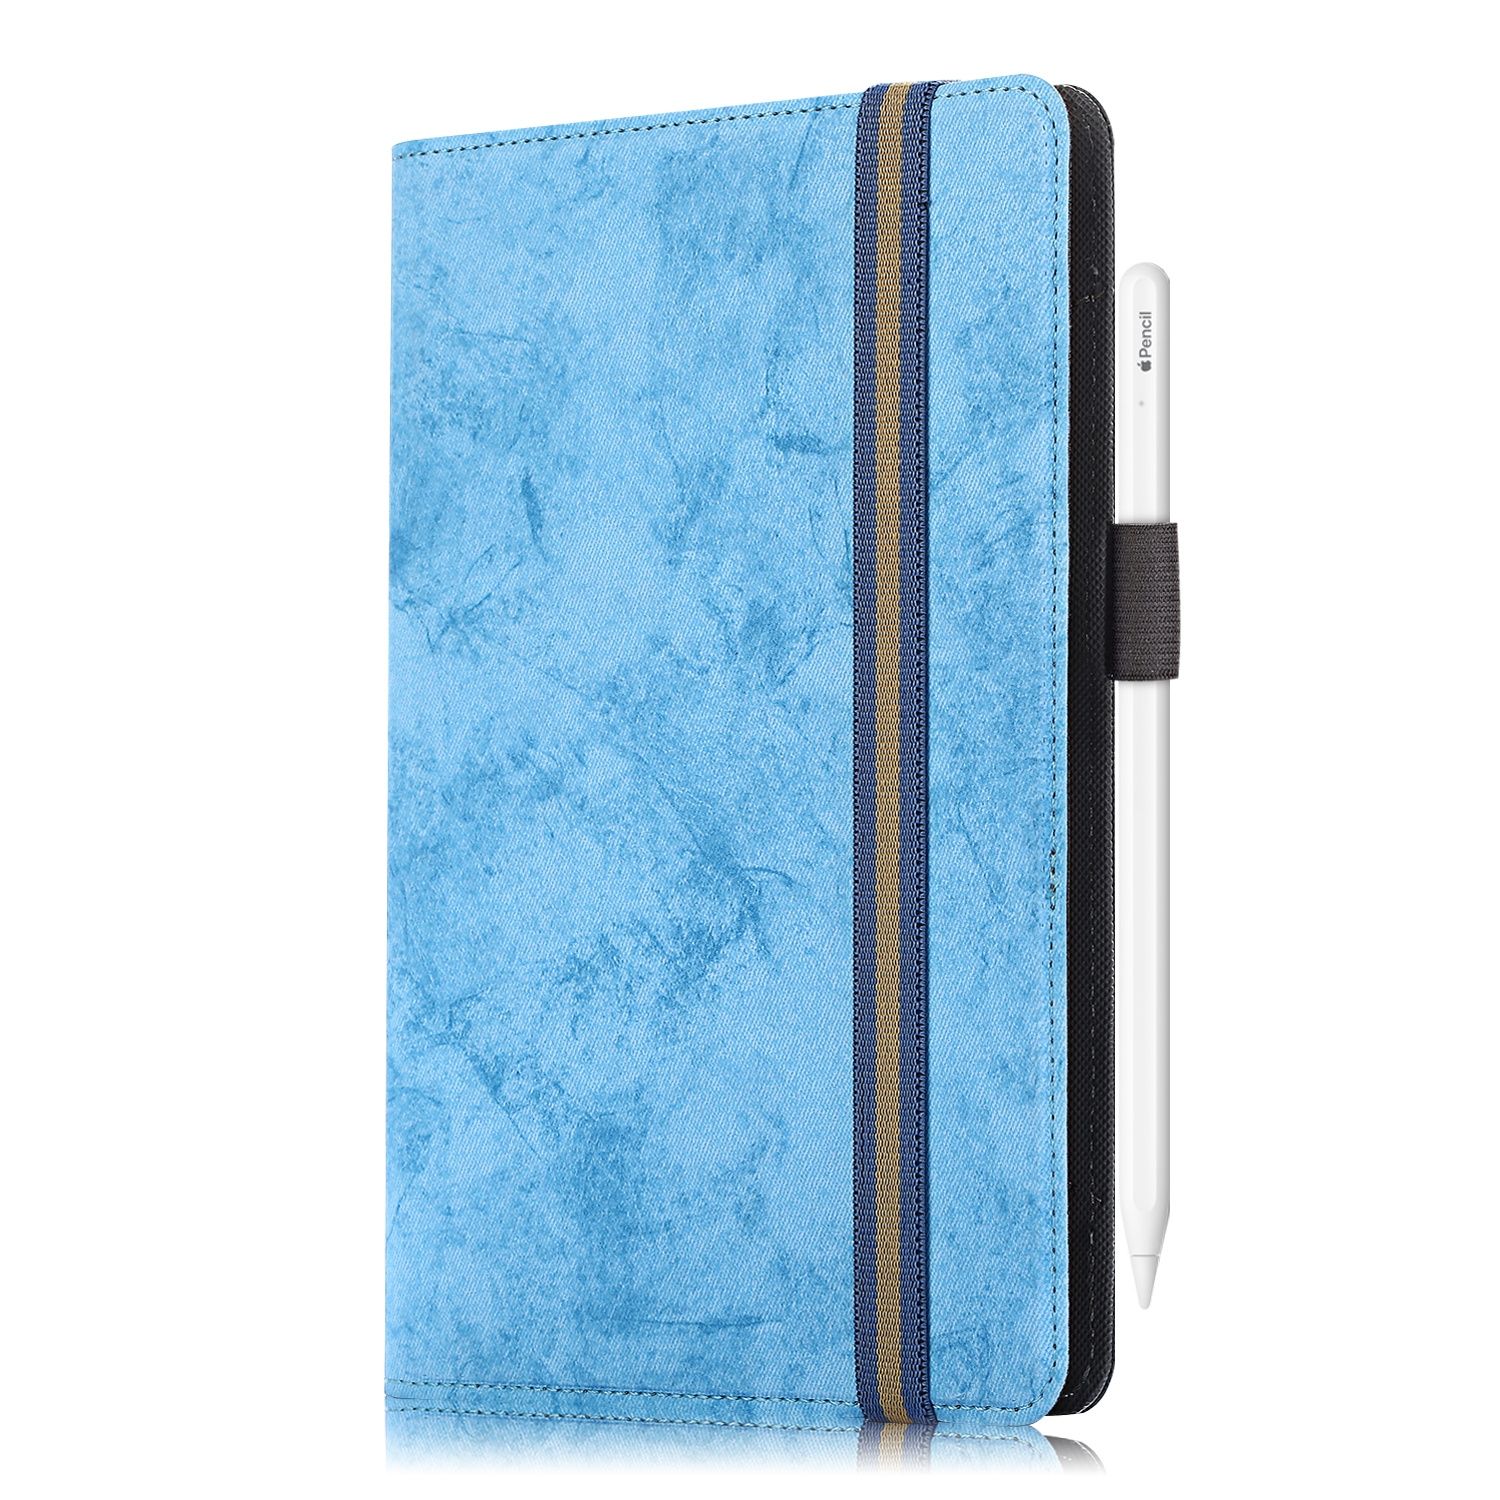 universal-thiki-wallet-book-case-gia-tablet-7-8-inches-light-blue-4.jpg